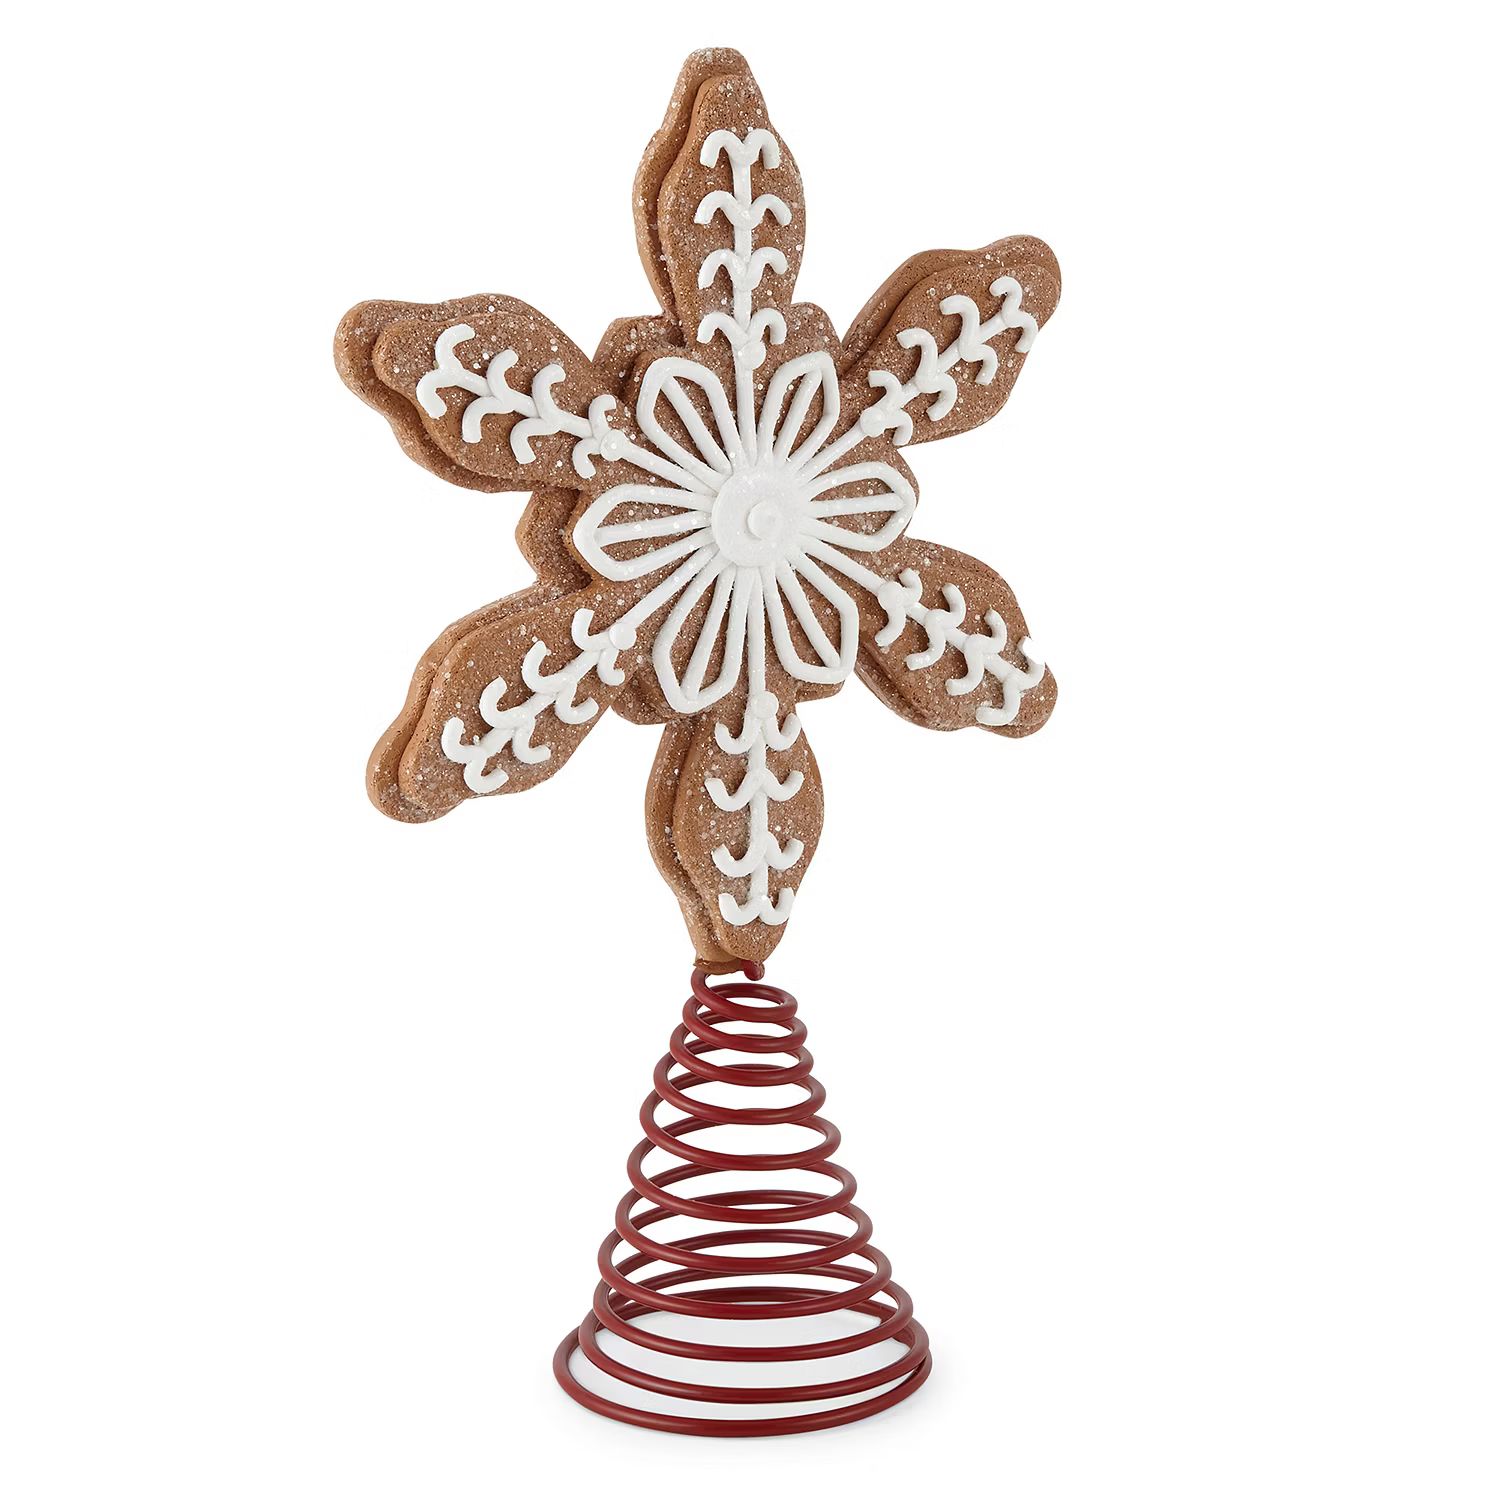 North Pole Trading Co. Gingerbread Star Christmas Tree Topper | JCPenney